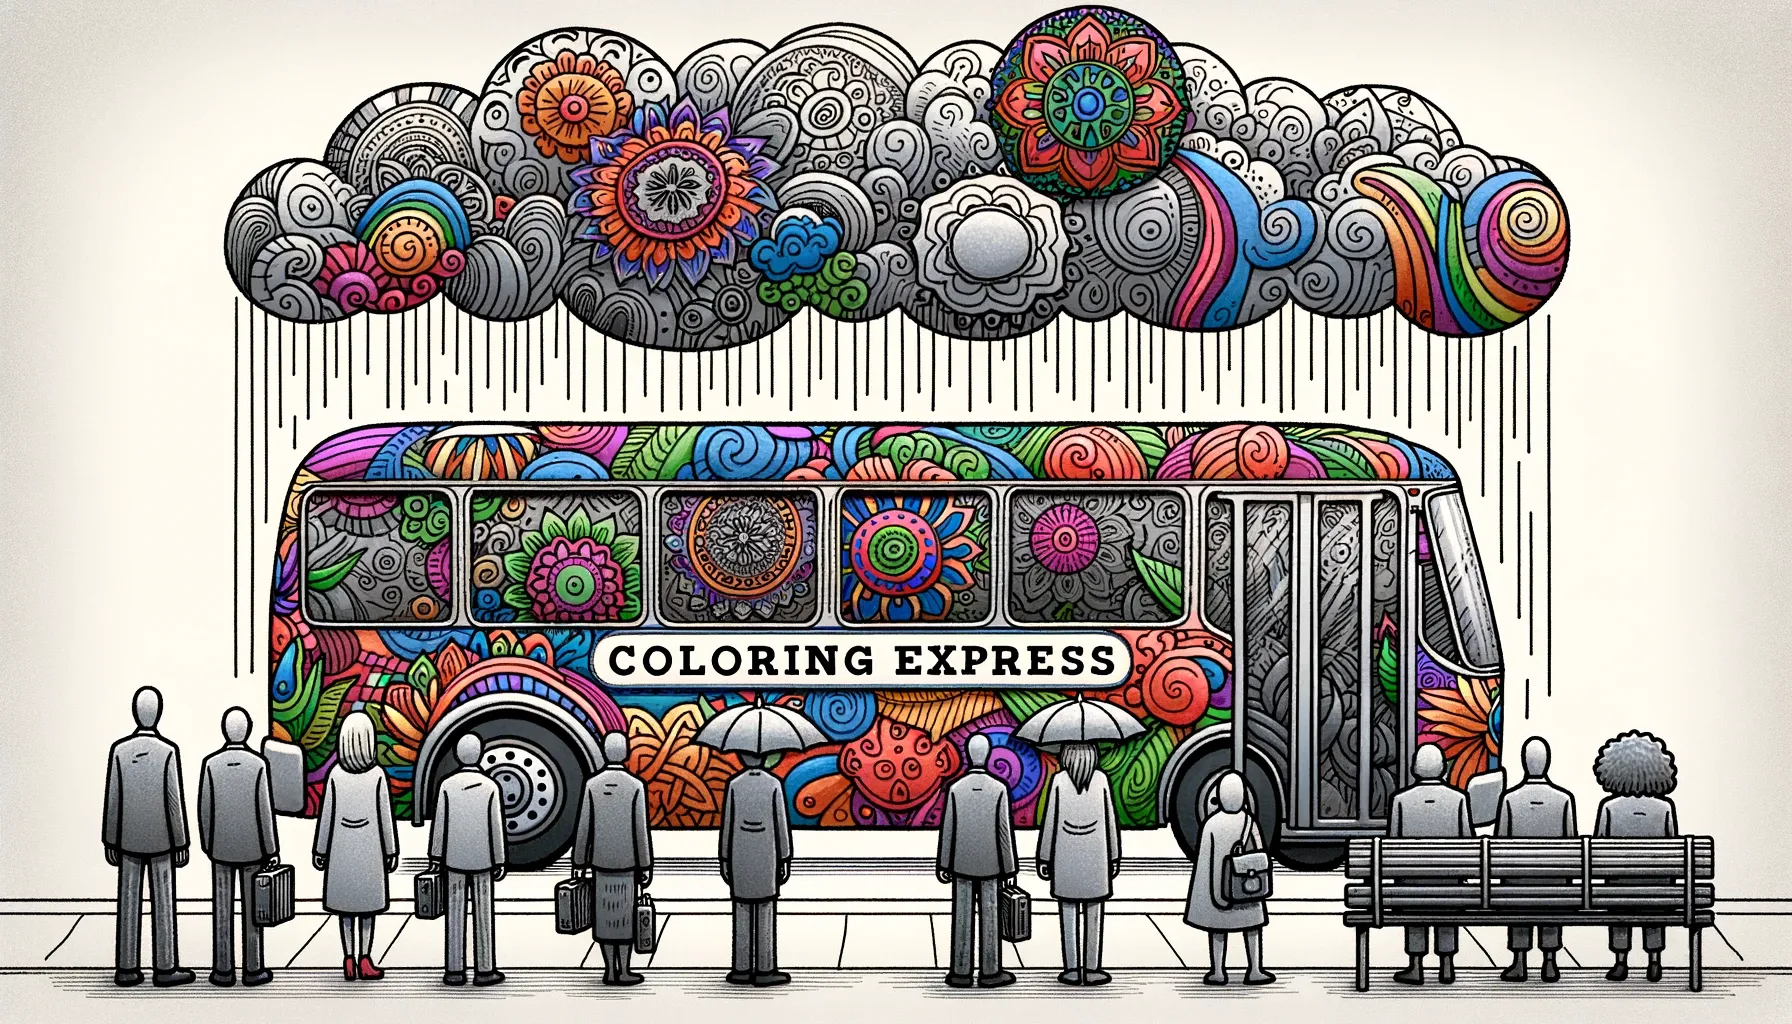 Wide doodle illustration: Adults standing at a bus stop under a gray rain cloud. A bus labeled 'Coloring Express' arrives, painted with vivid hues and mandalas. As passengers board, their gray silhouettes become colorful and lively.